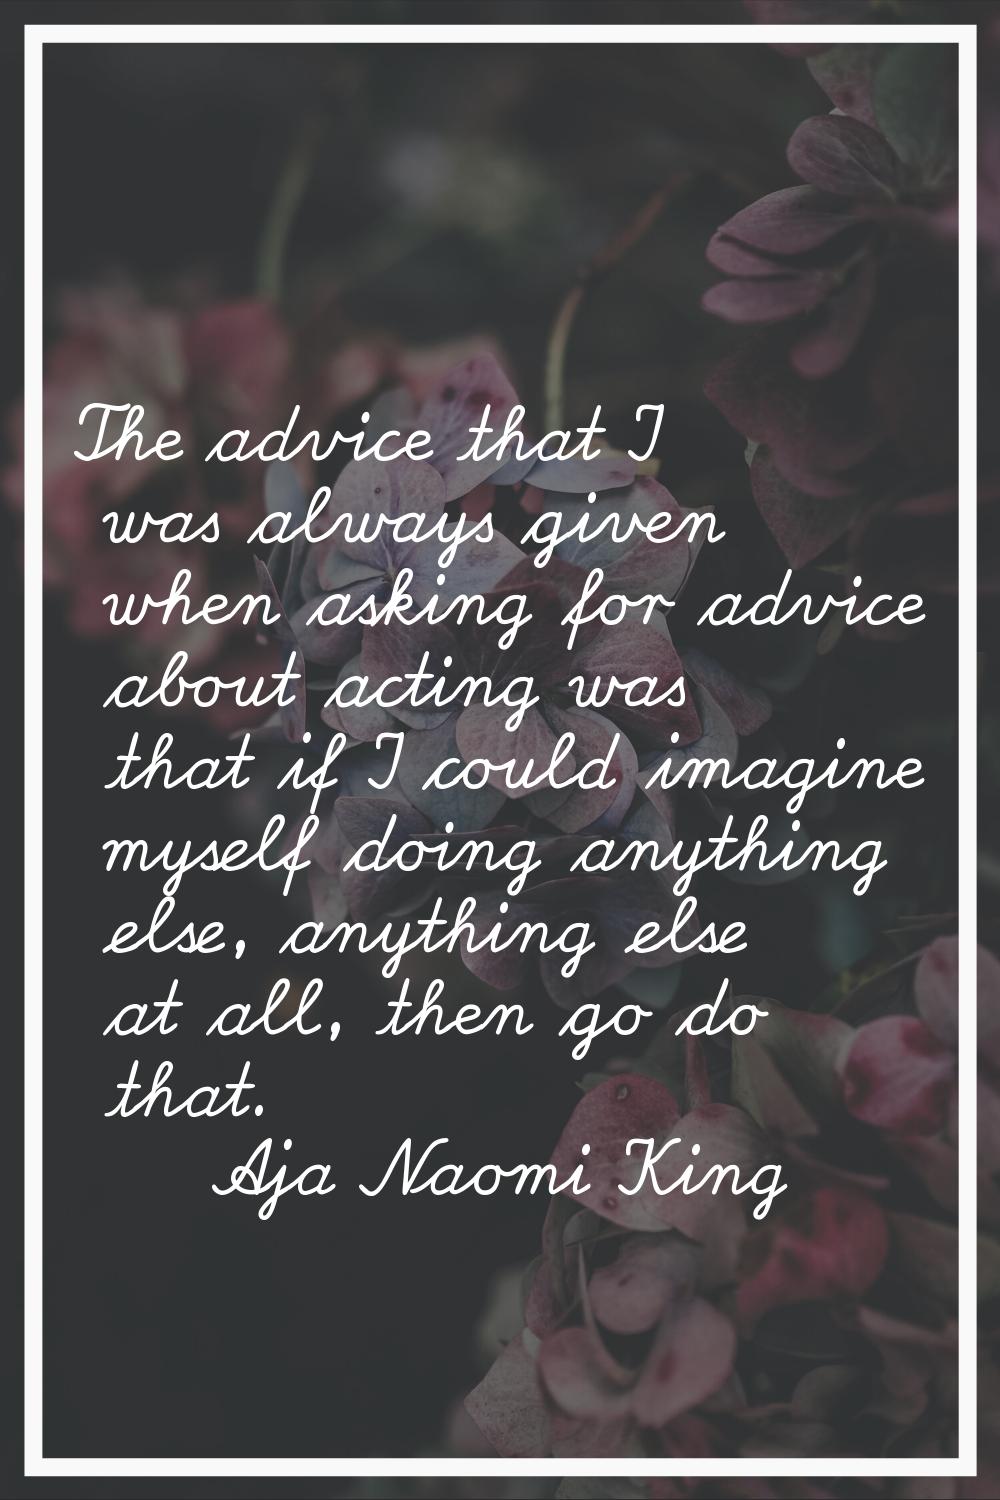 The advice that I was always given when asking for advice about acting was that if I could imagine 